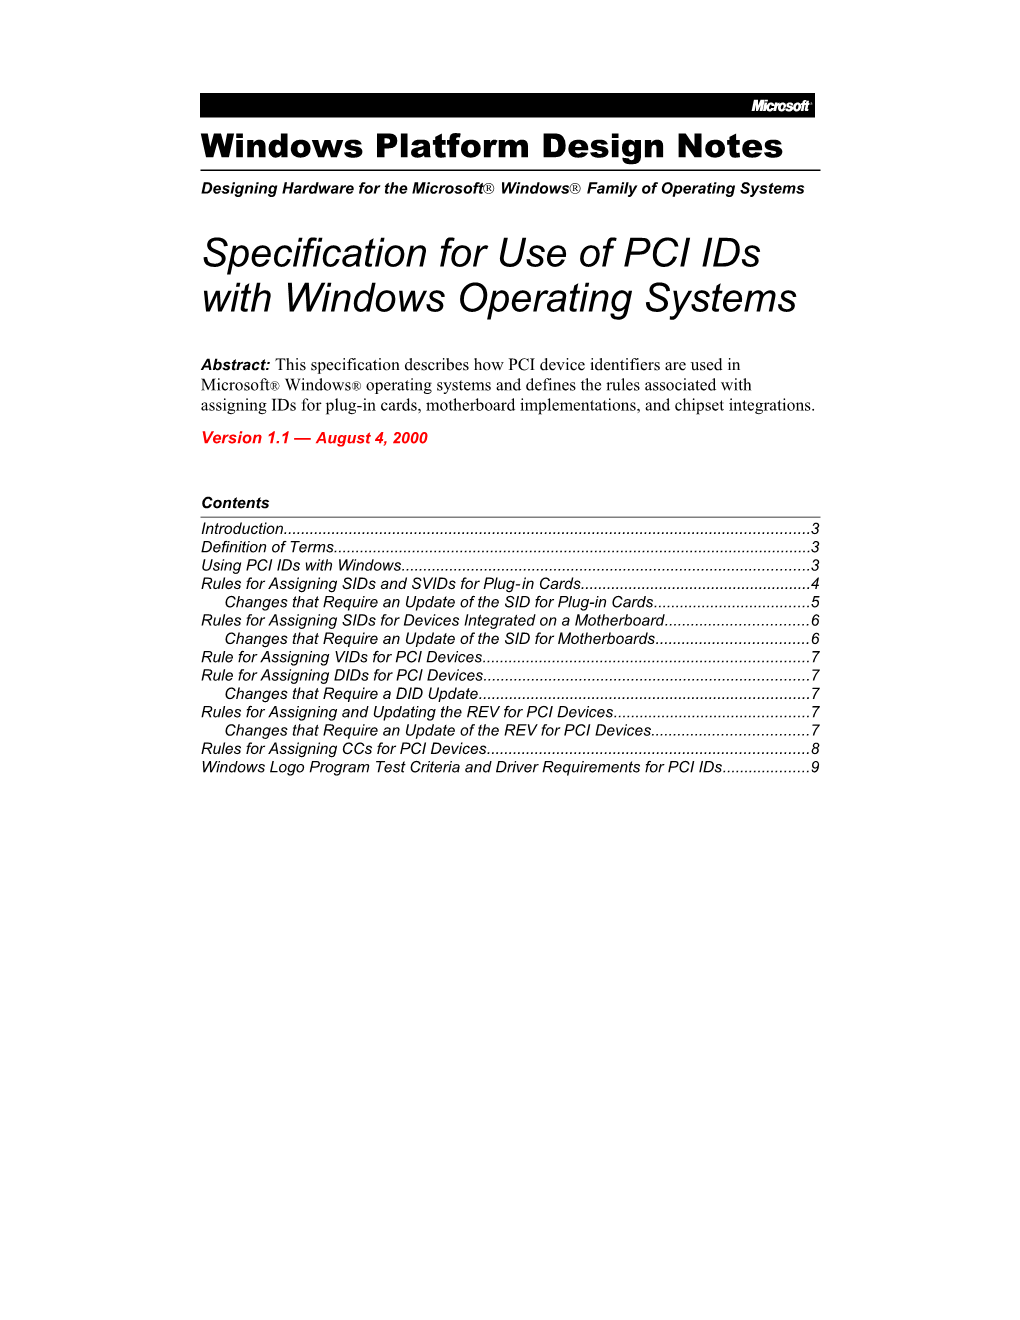 Specification for Use of PCI Ids with Windows Operating Systems